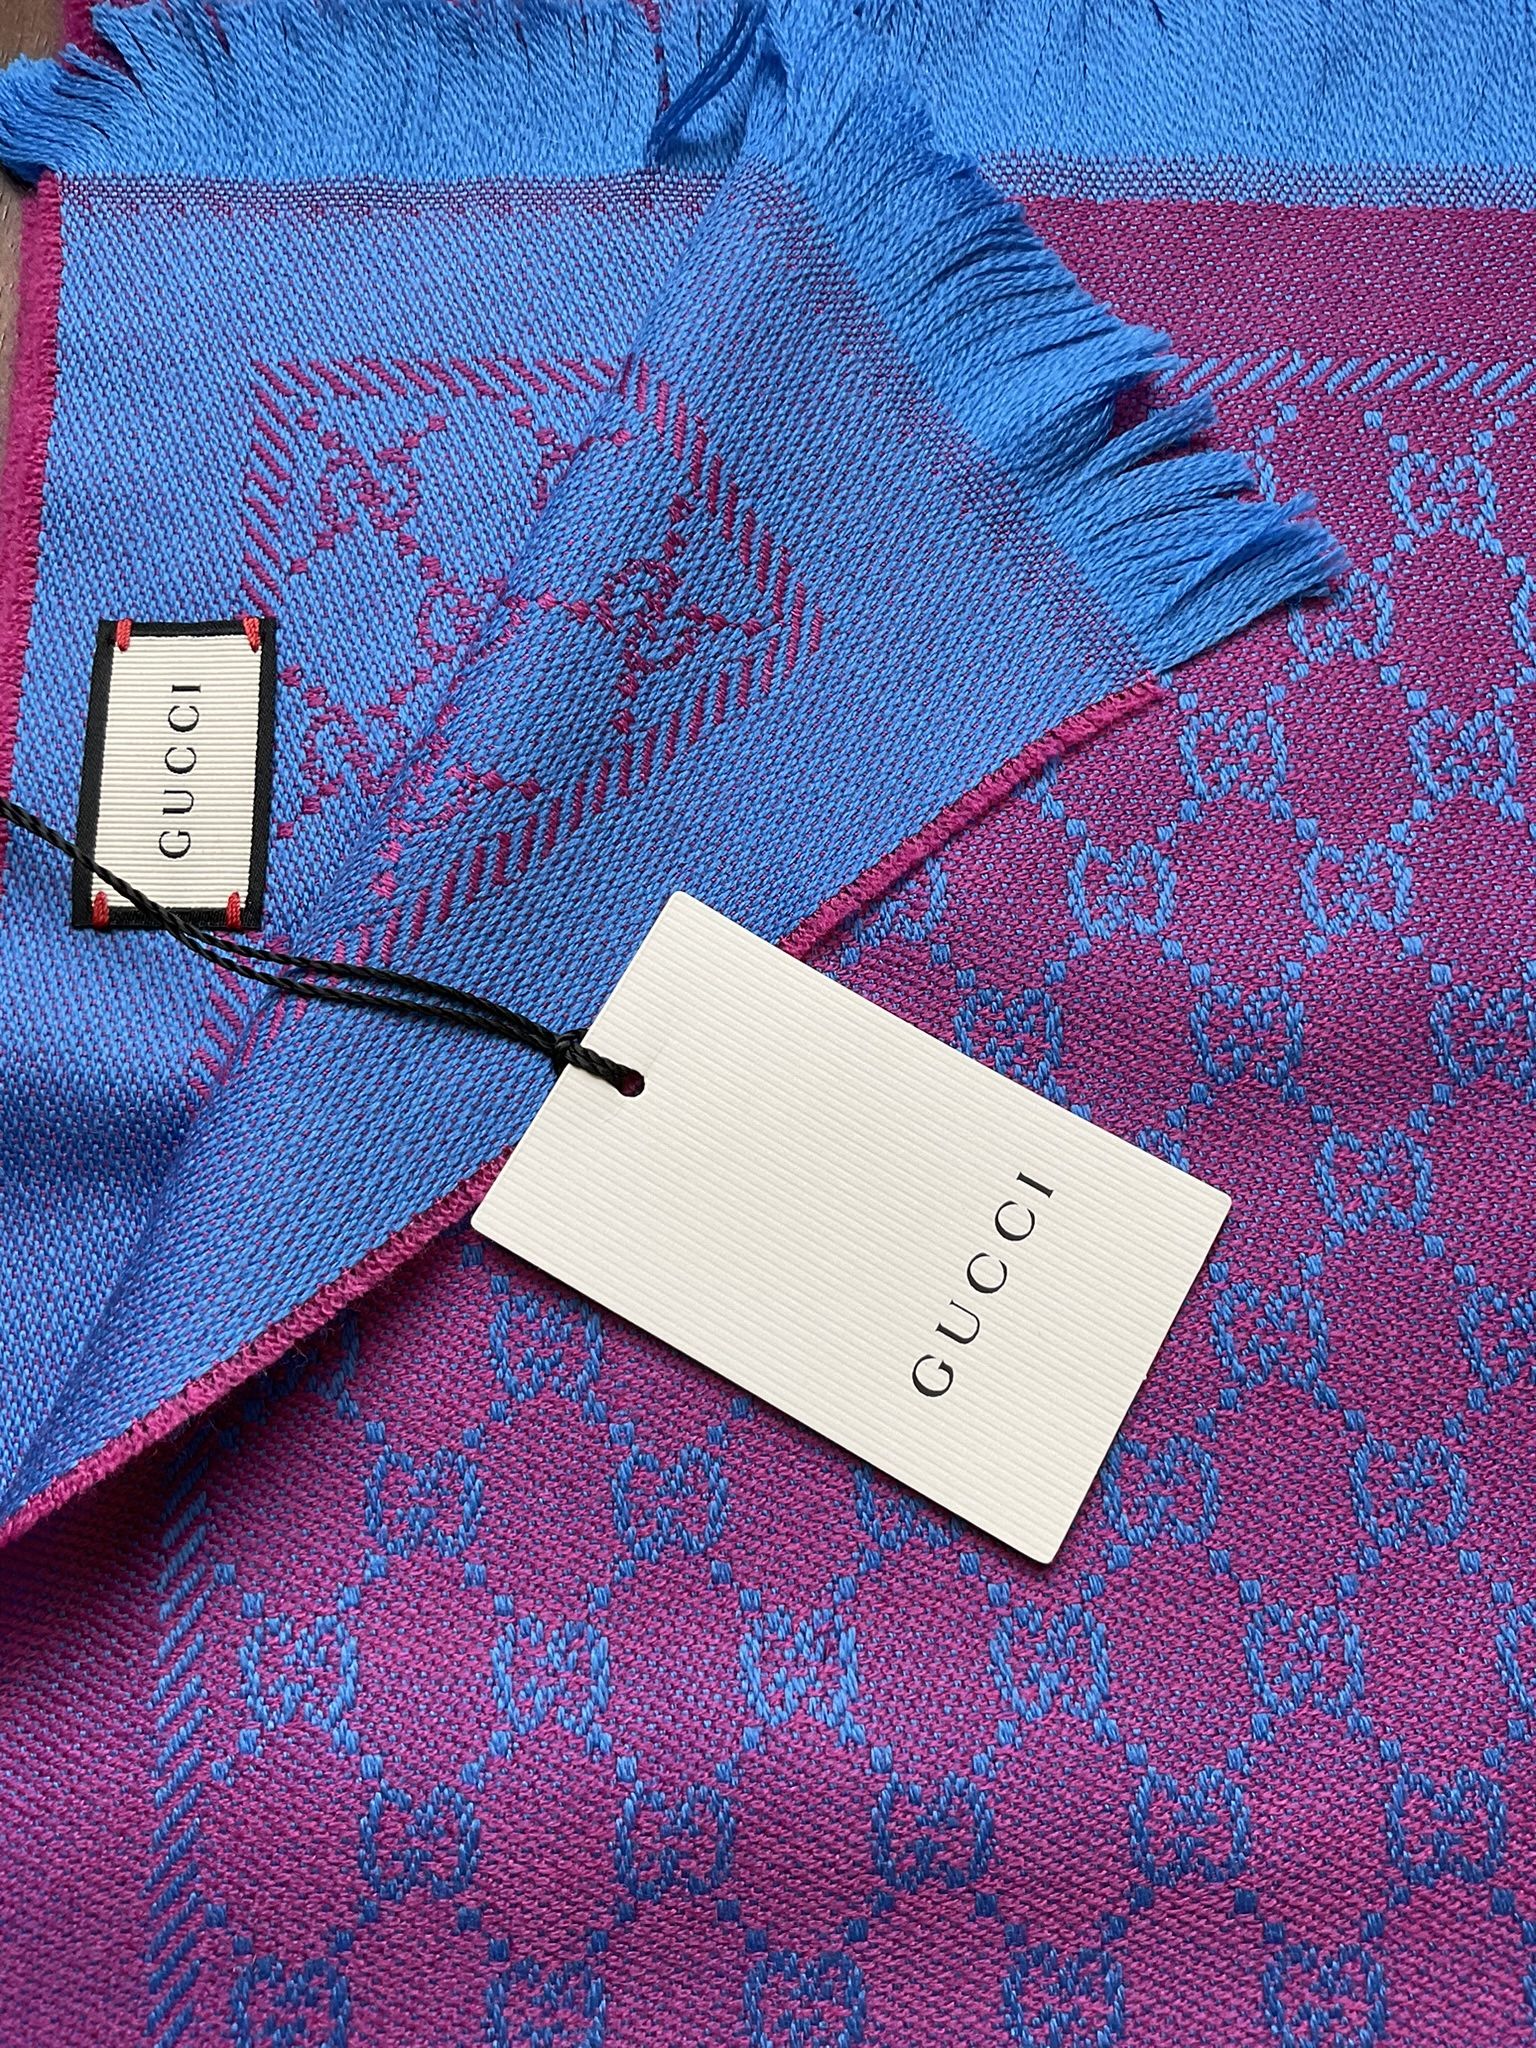 Brand New Gucci Monogram GG Women Wool Scarf New With Tags